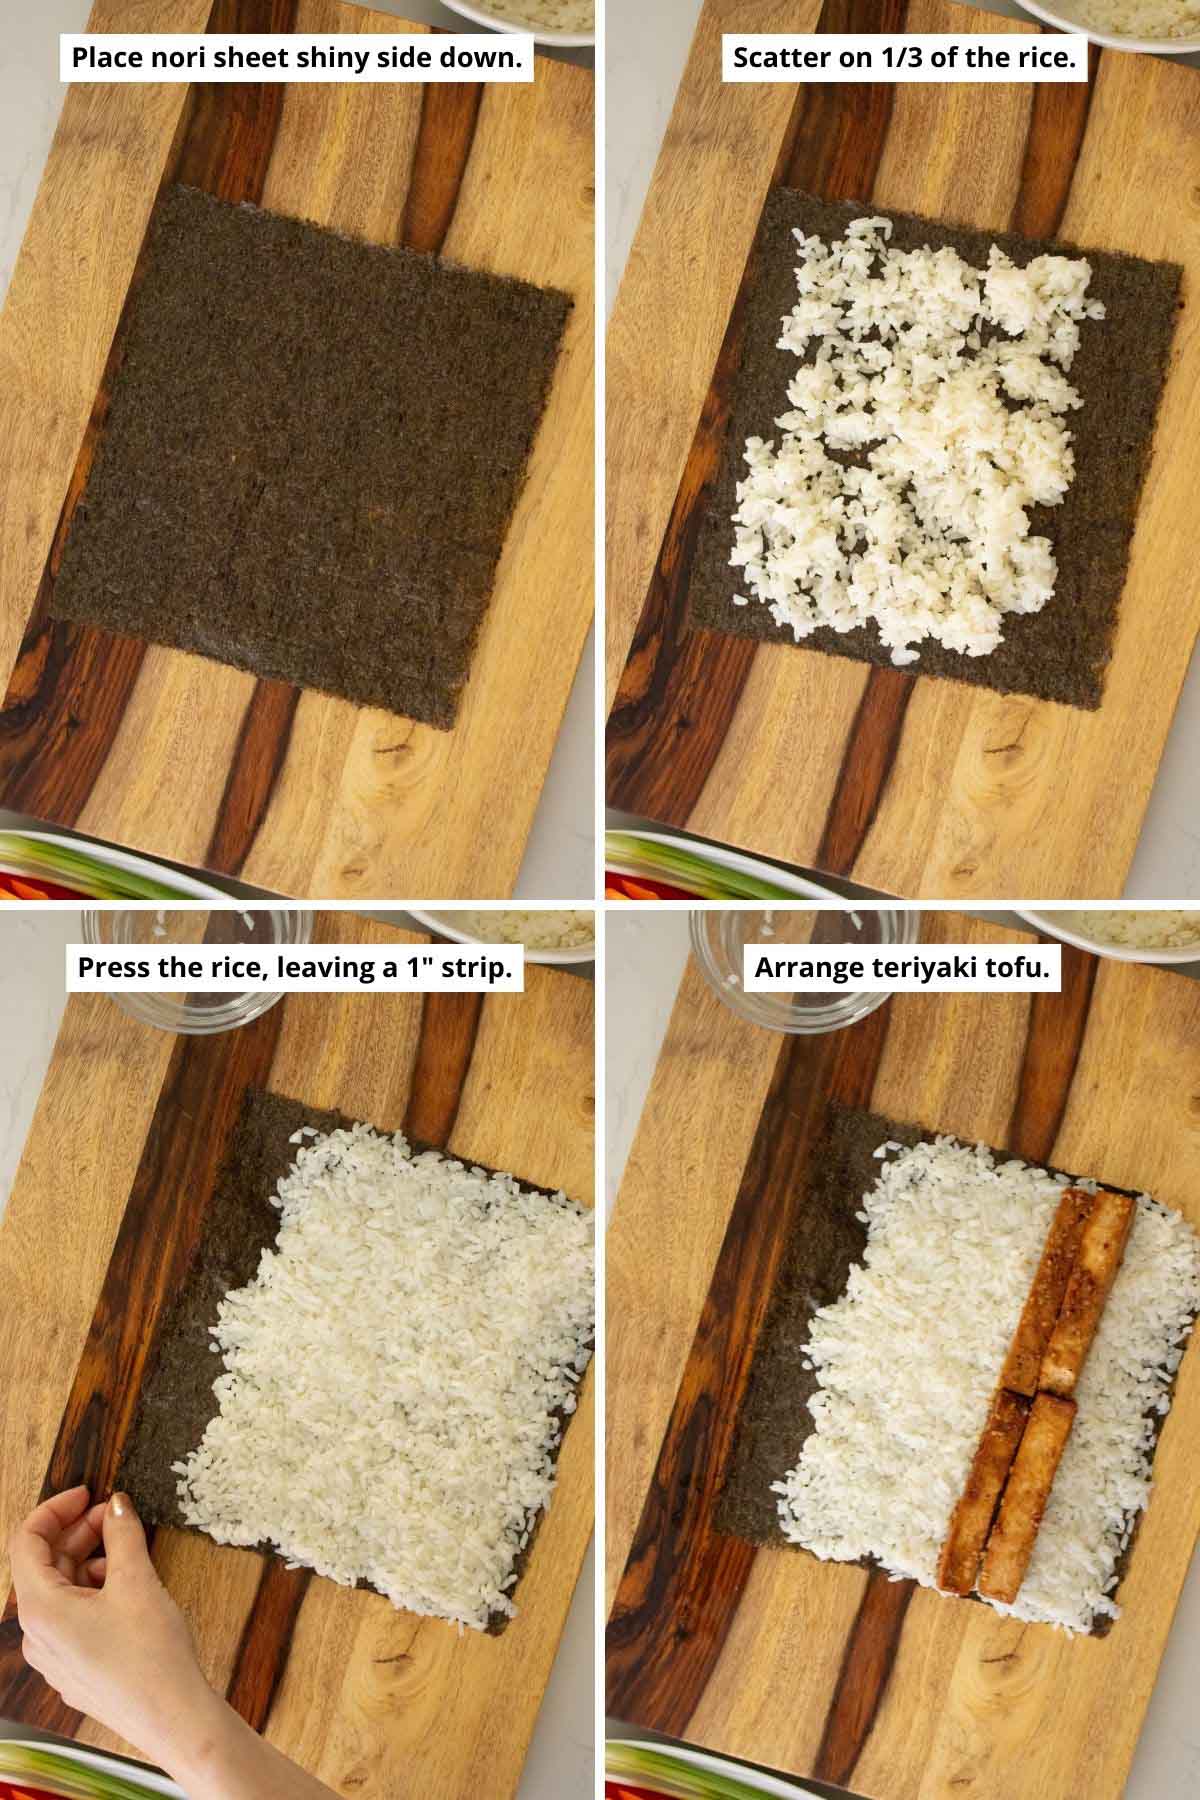 image collage showing sushi nori, adding rice to the nori, the rice after pressing, and arranging the tofu on the rice